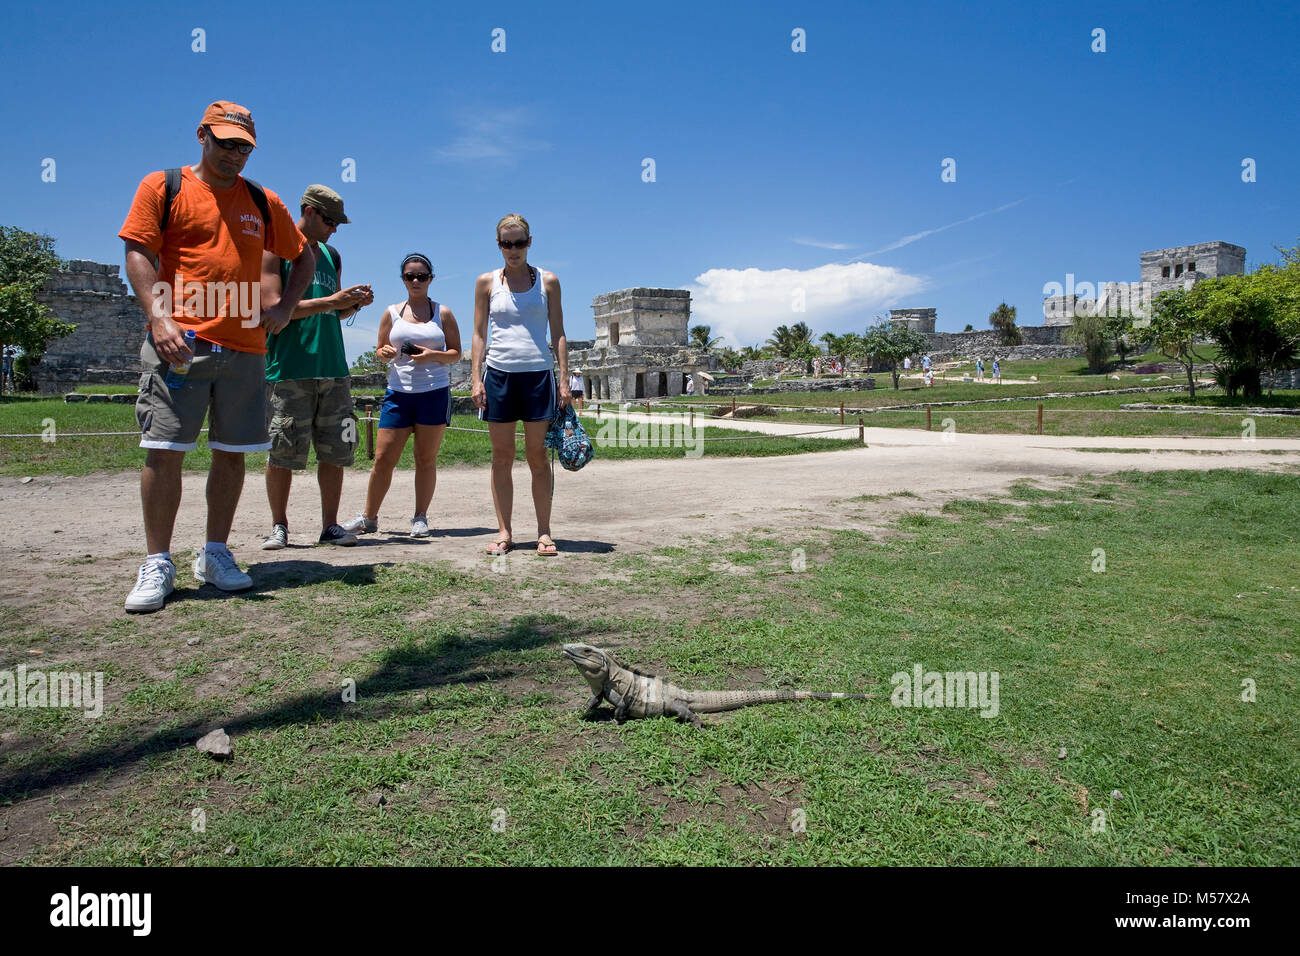 Tourists watch a lizzard in front of Mayan ruins, Tulum Archeological zone, Tulum, Riviera Maya, Quintana Roo, Yucatan, Mexico, Caribbean Stock Photo